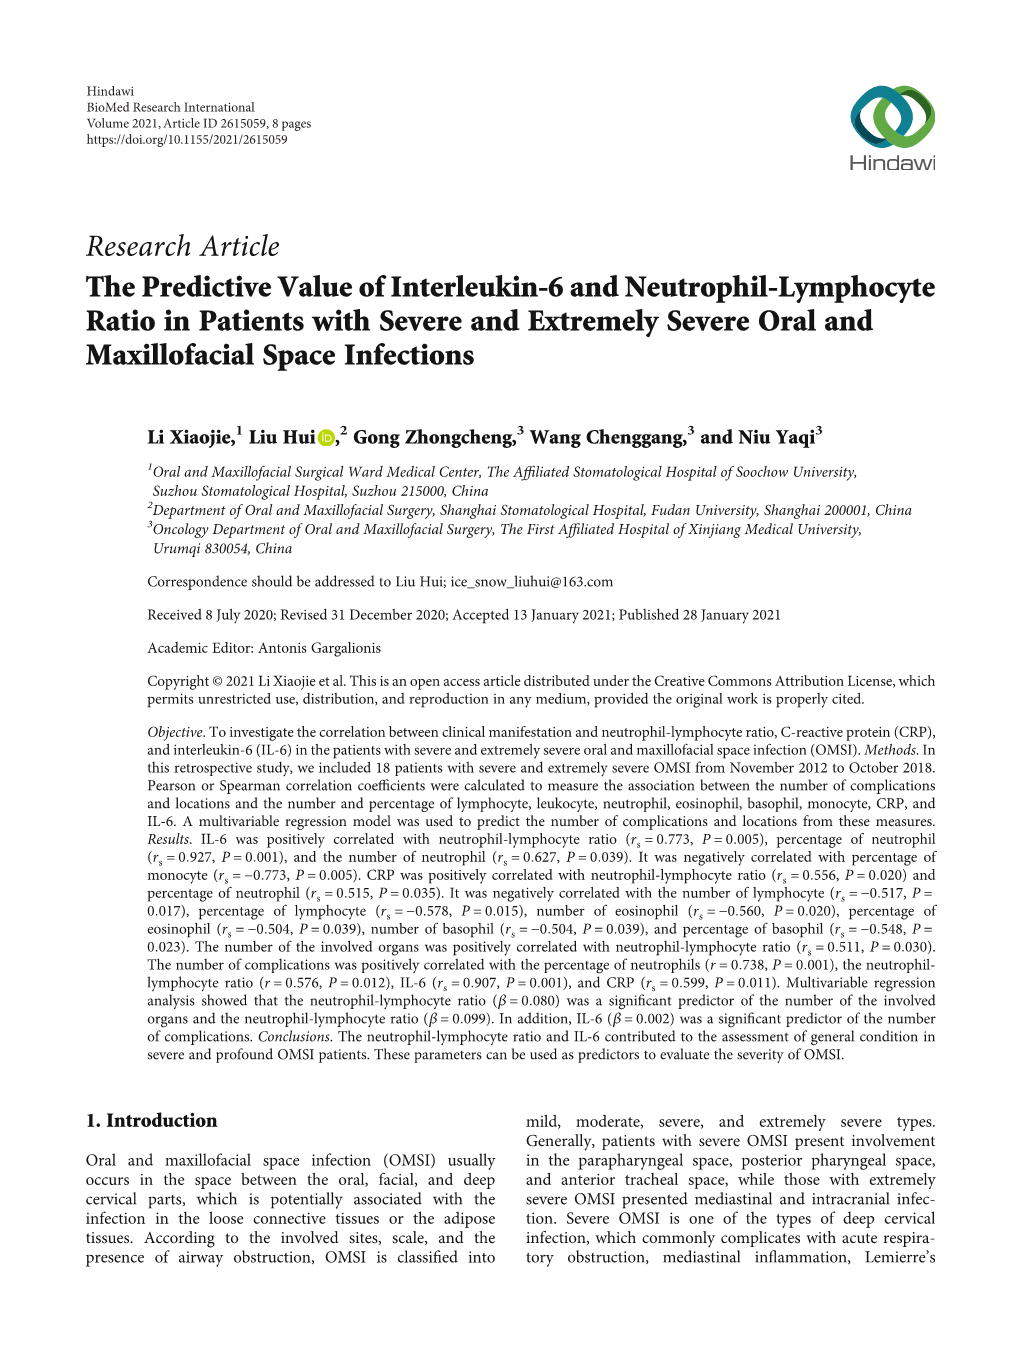 The Predictive Value of Interleukin-6 and Neutrophil-Lymphocyte Ratio in Patients with Severe and Extremely Severe Oral and Maxillofacial Space Infections